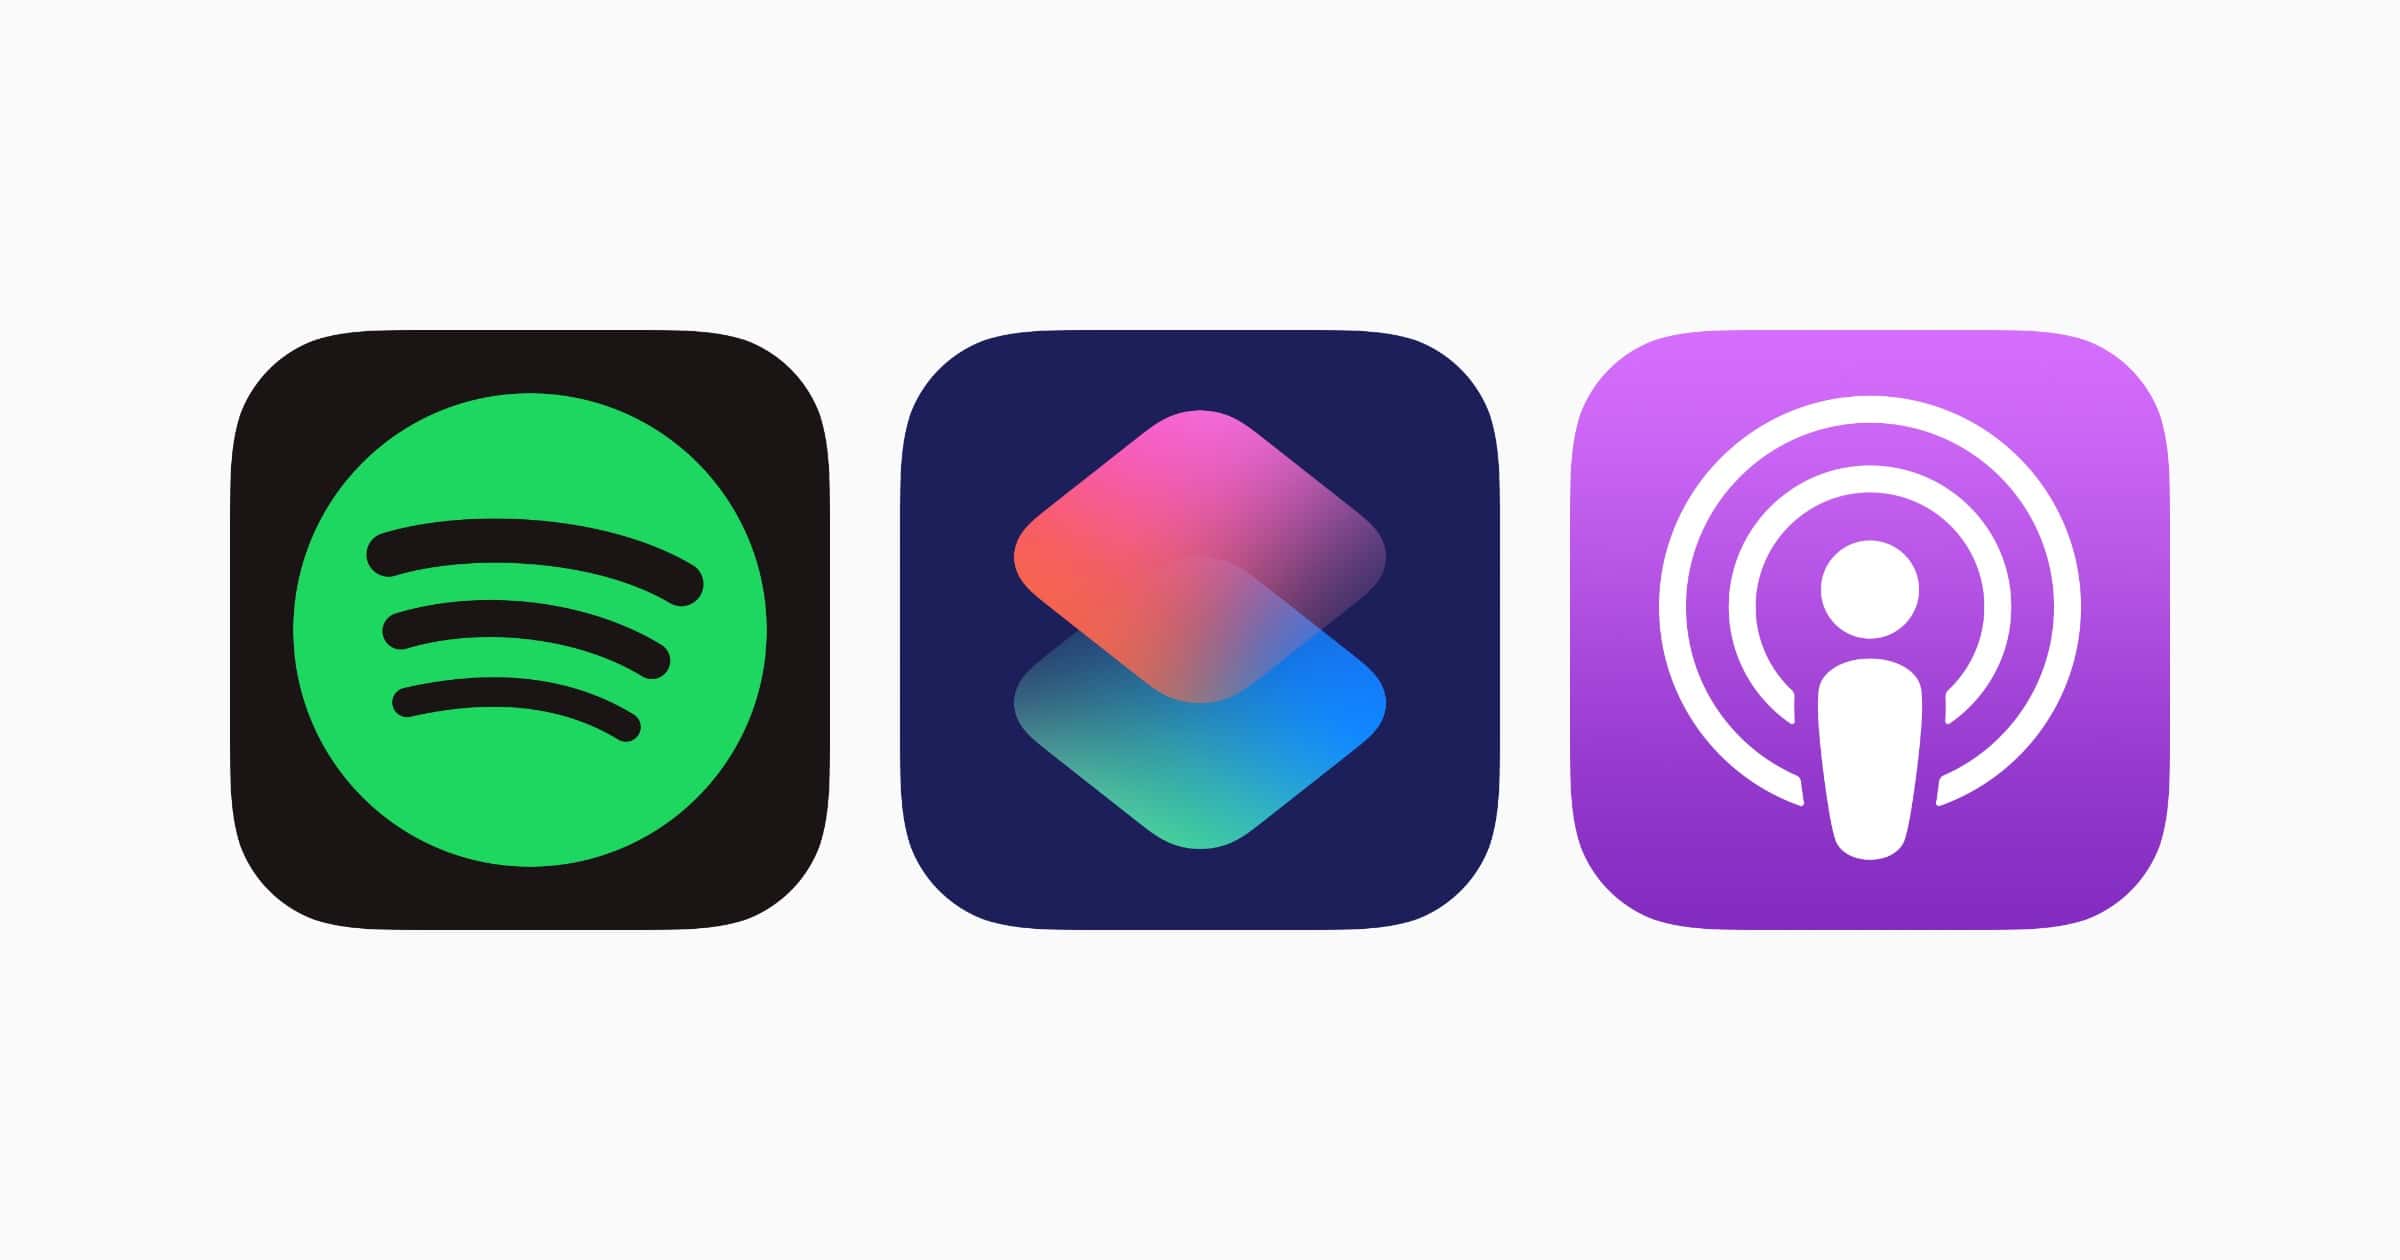 Icons of Spotify, shortcuts, podcasts